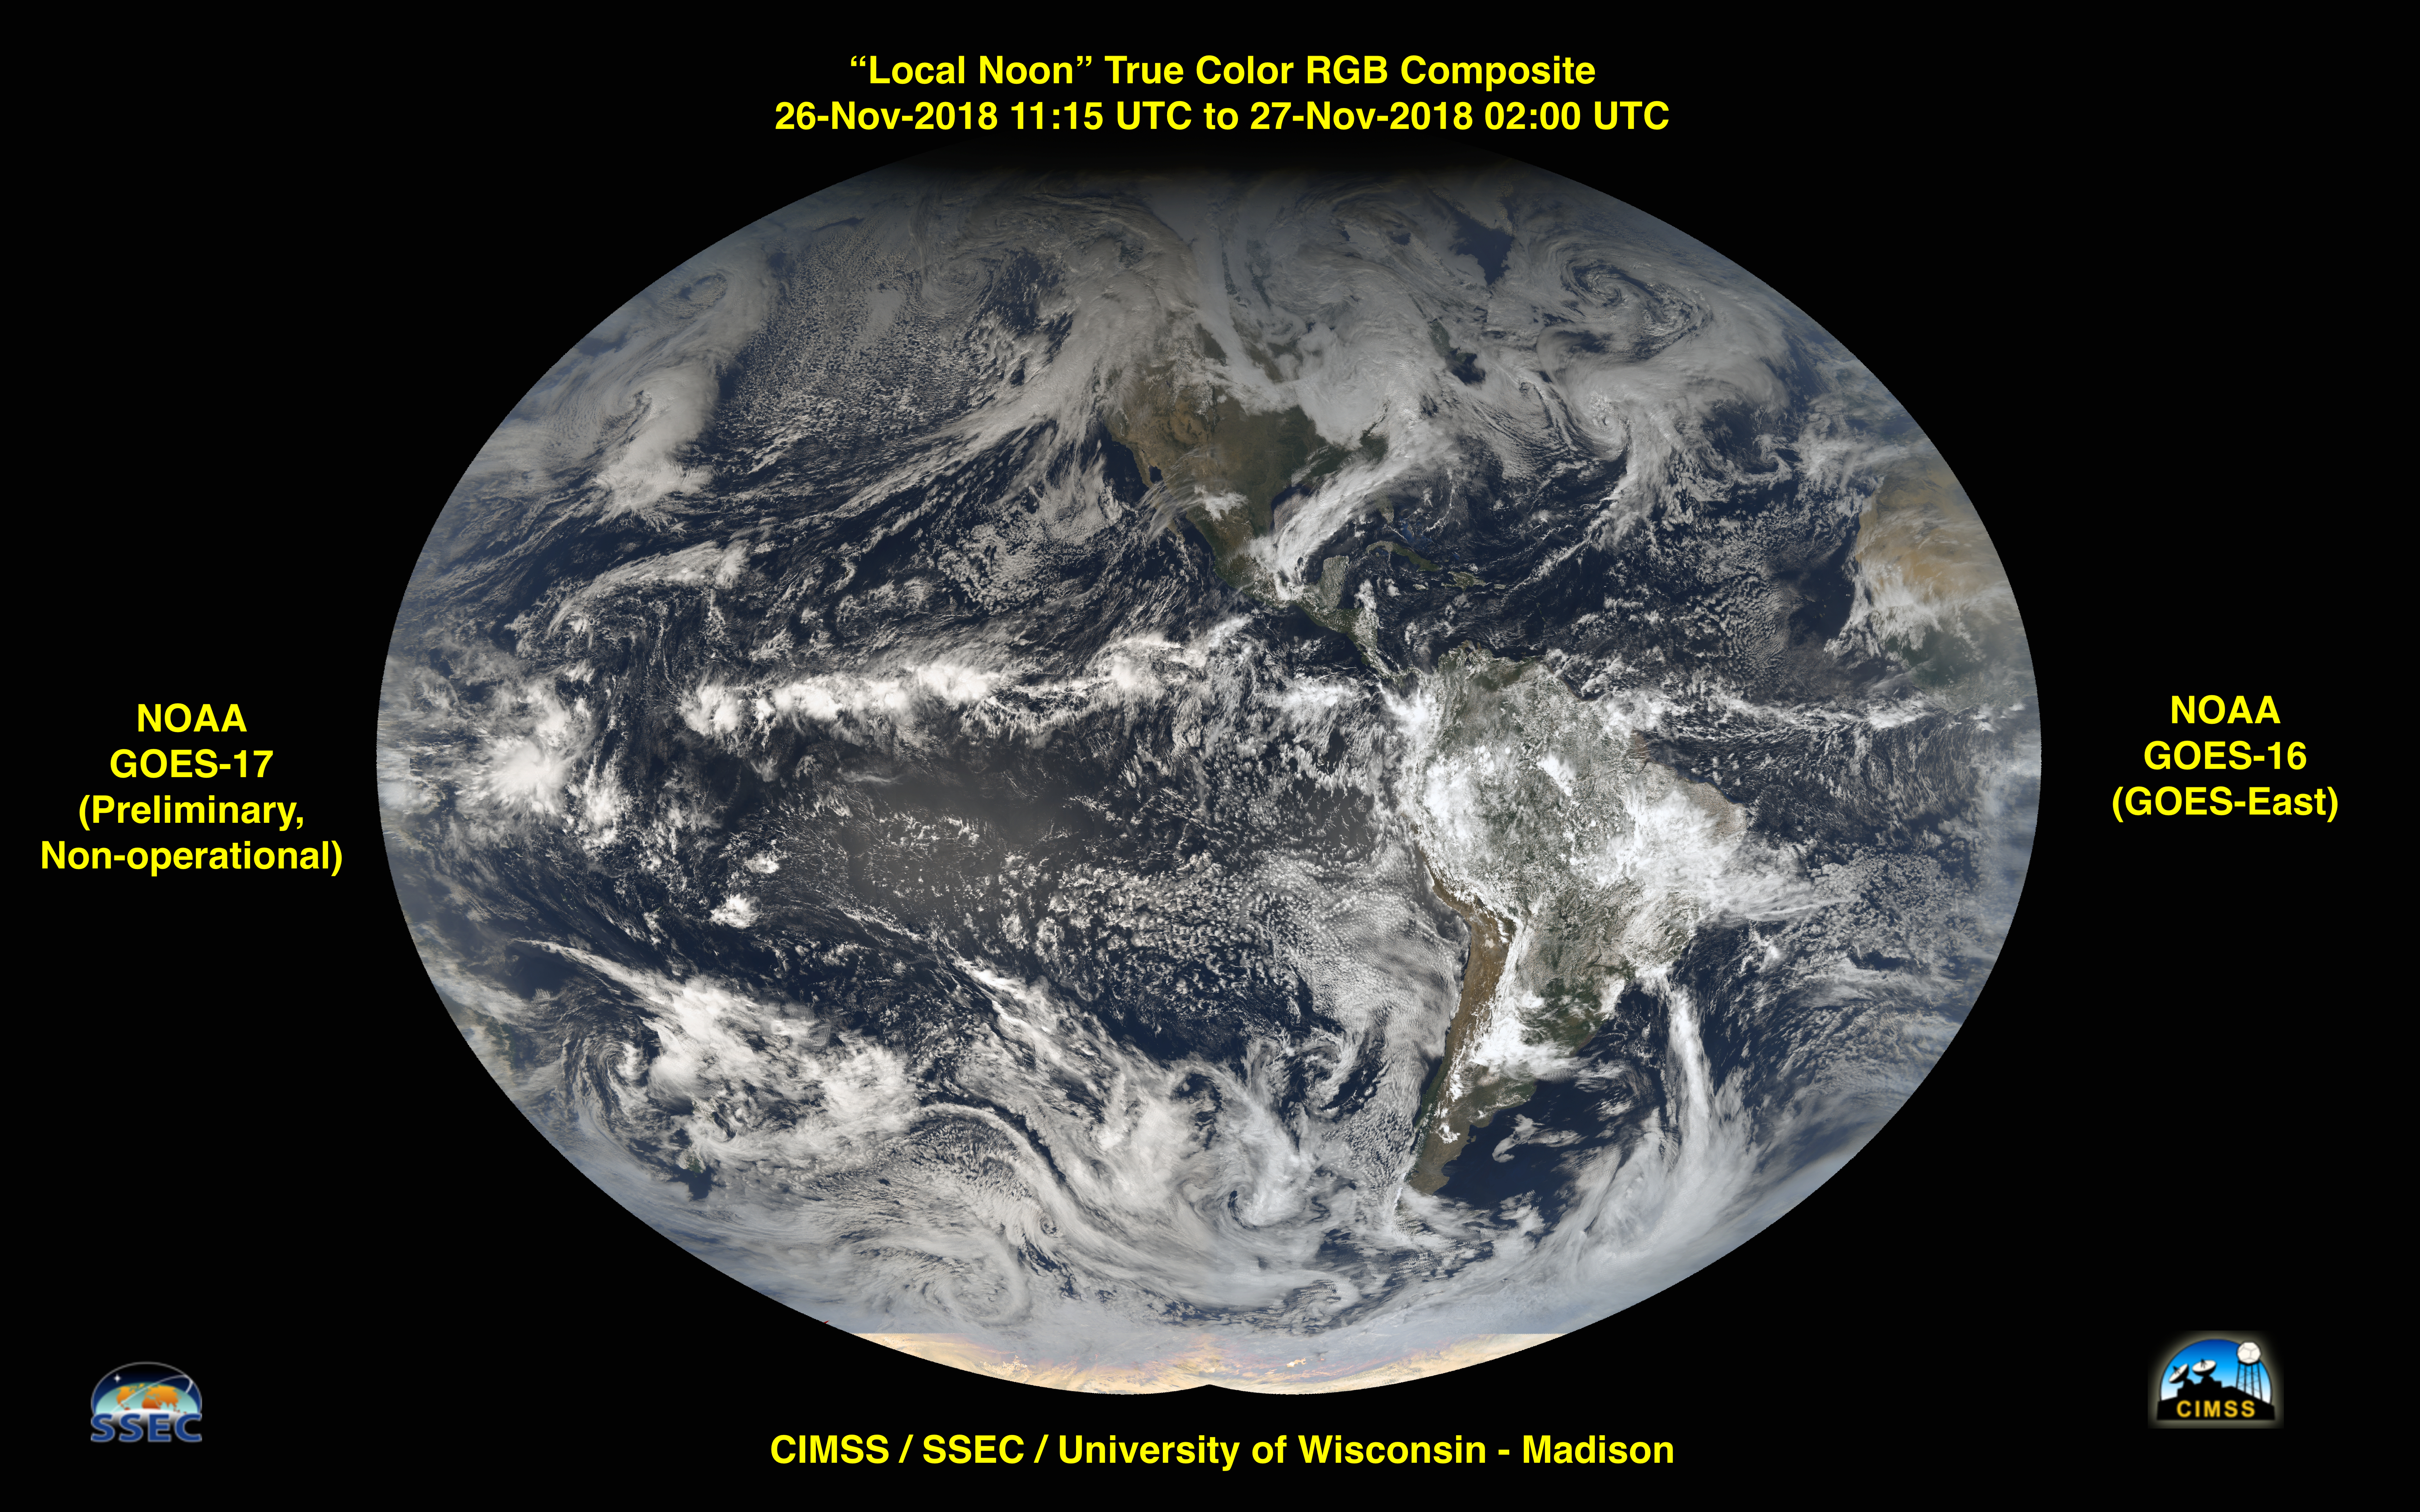 GOES-17 / GOES-16 True Color RGB composite [click to enlarge]